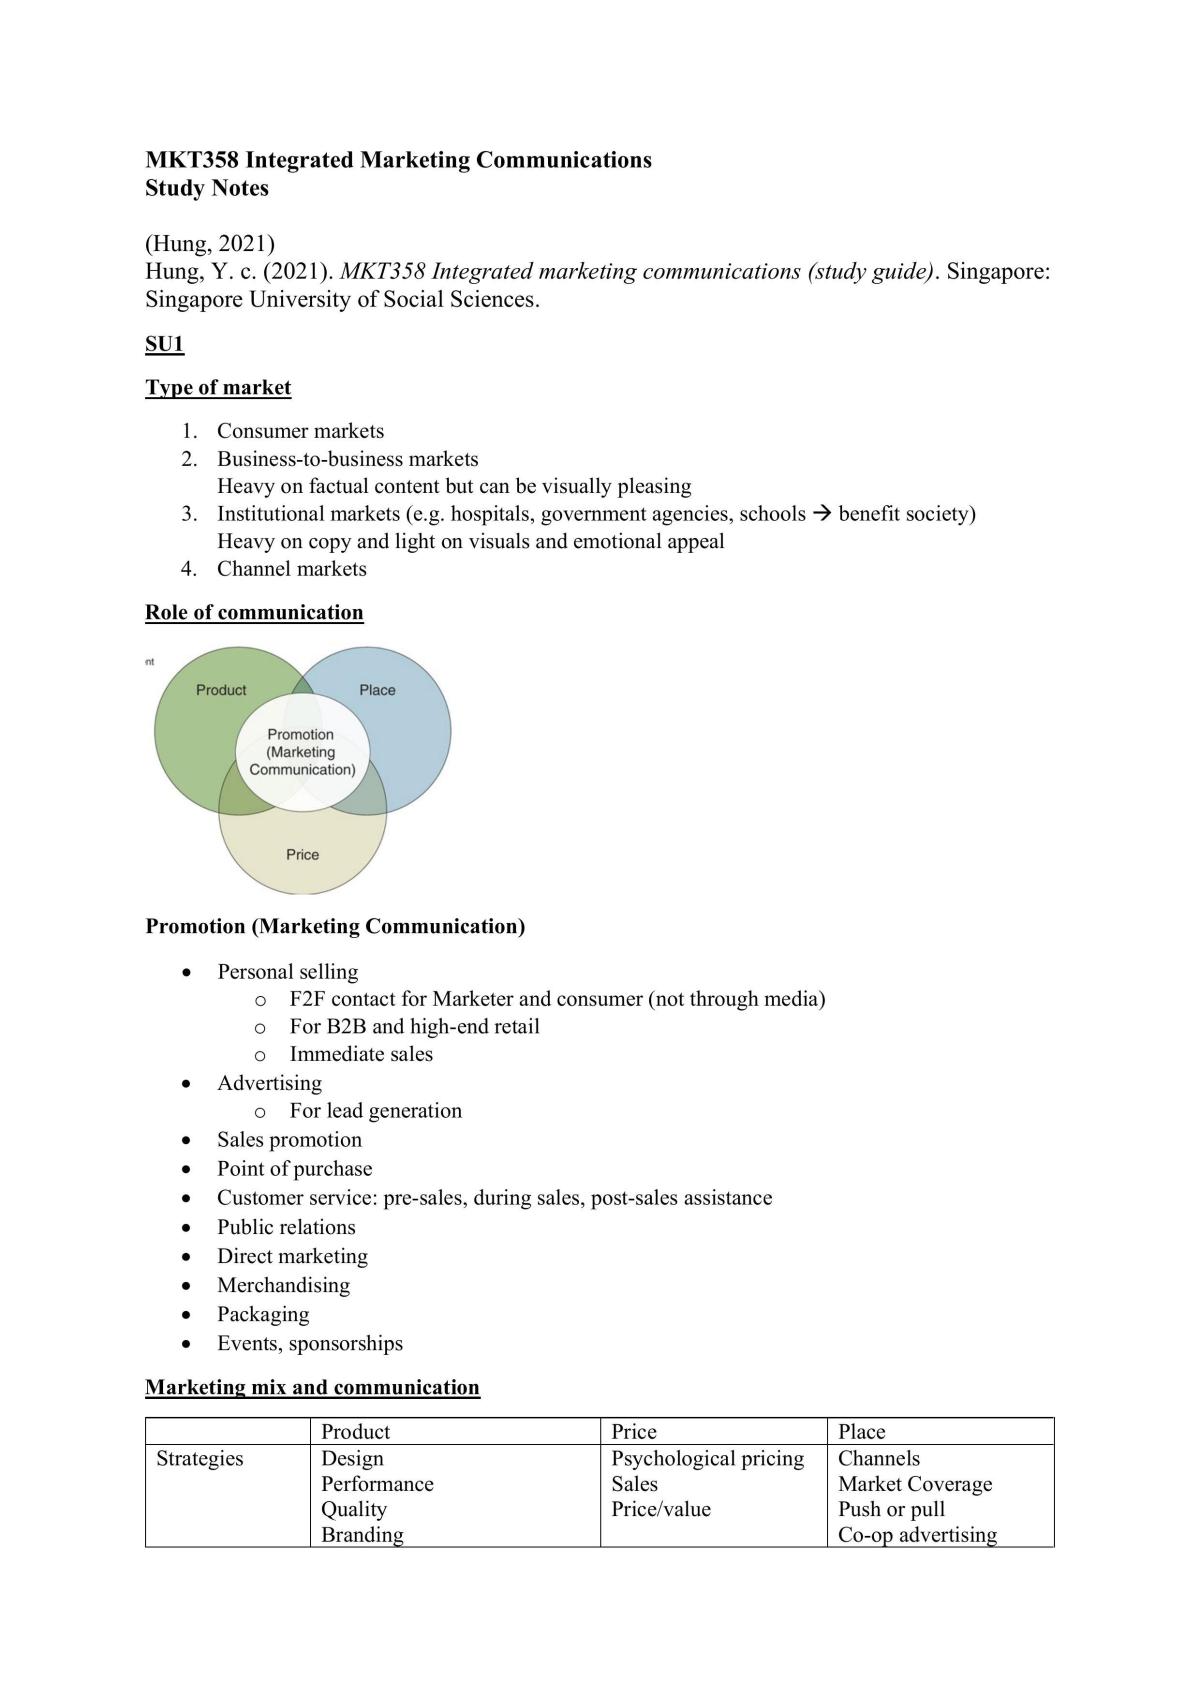 MKT358 Integrated Marketing Communications Study Notes - Page 1